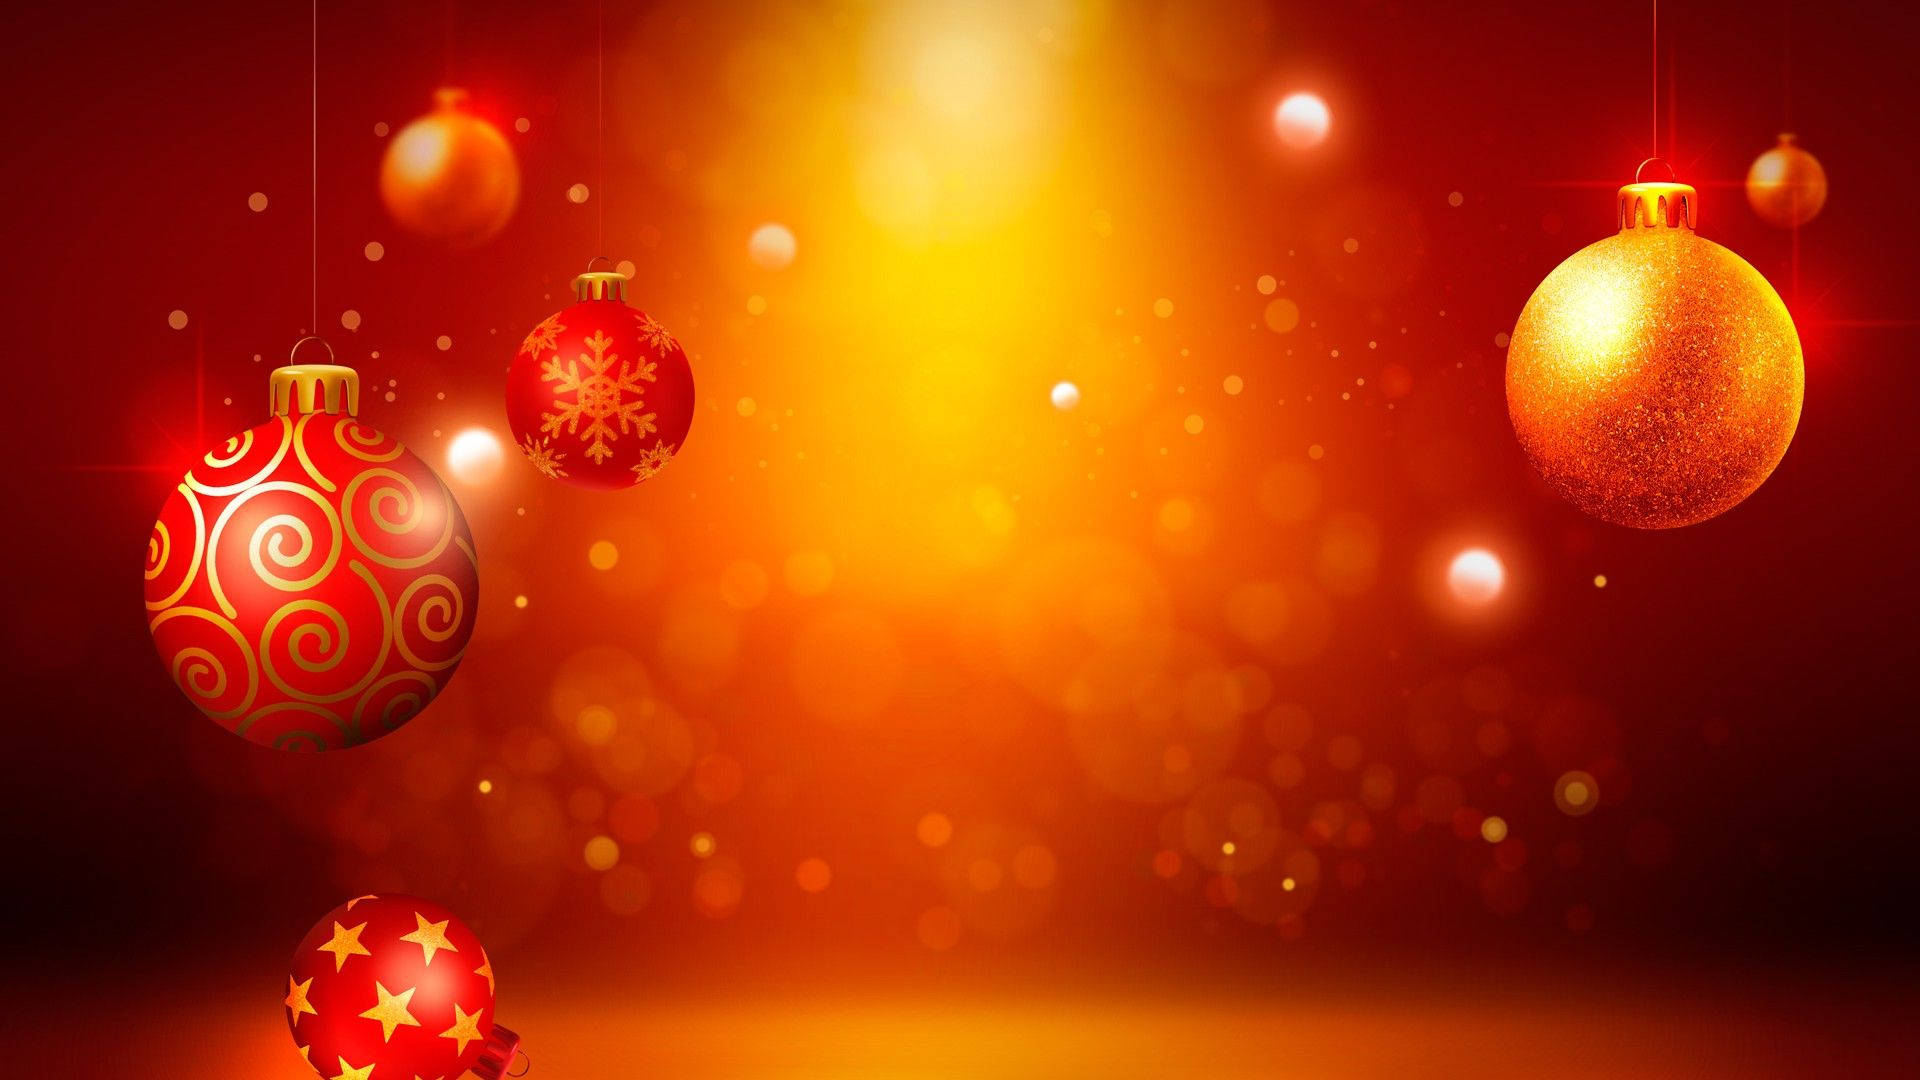 Gold And Red Christmas Background Wallpaper